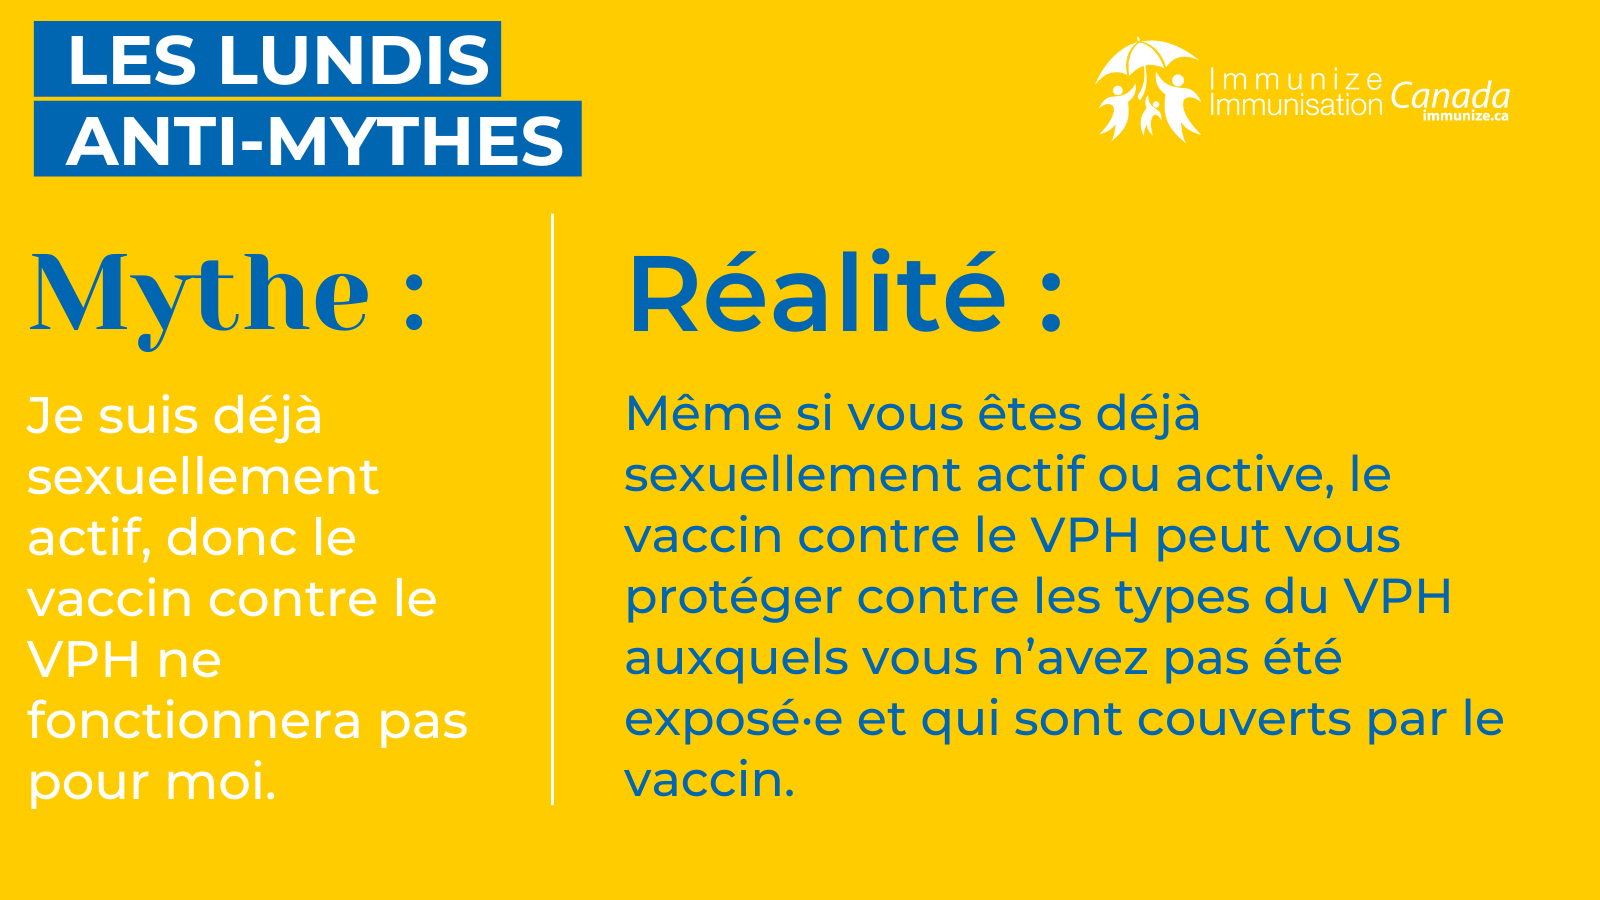 Lundis anti-mythes - image 4 pour Twitter